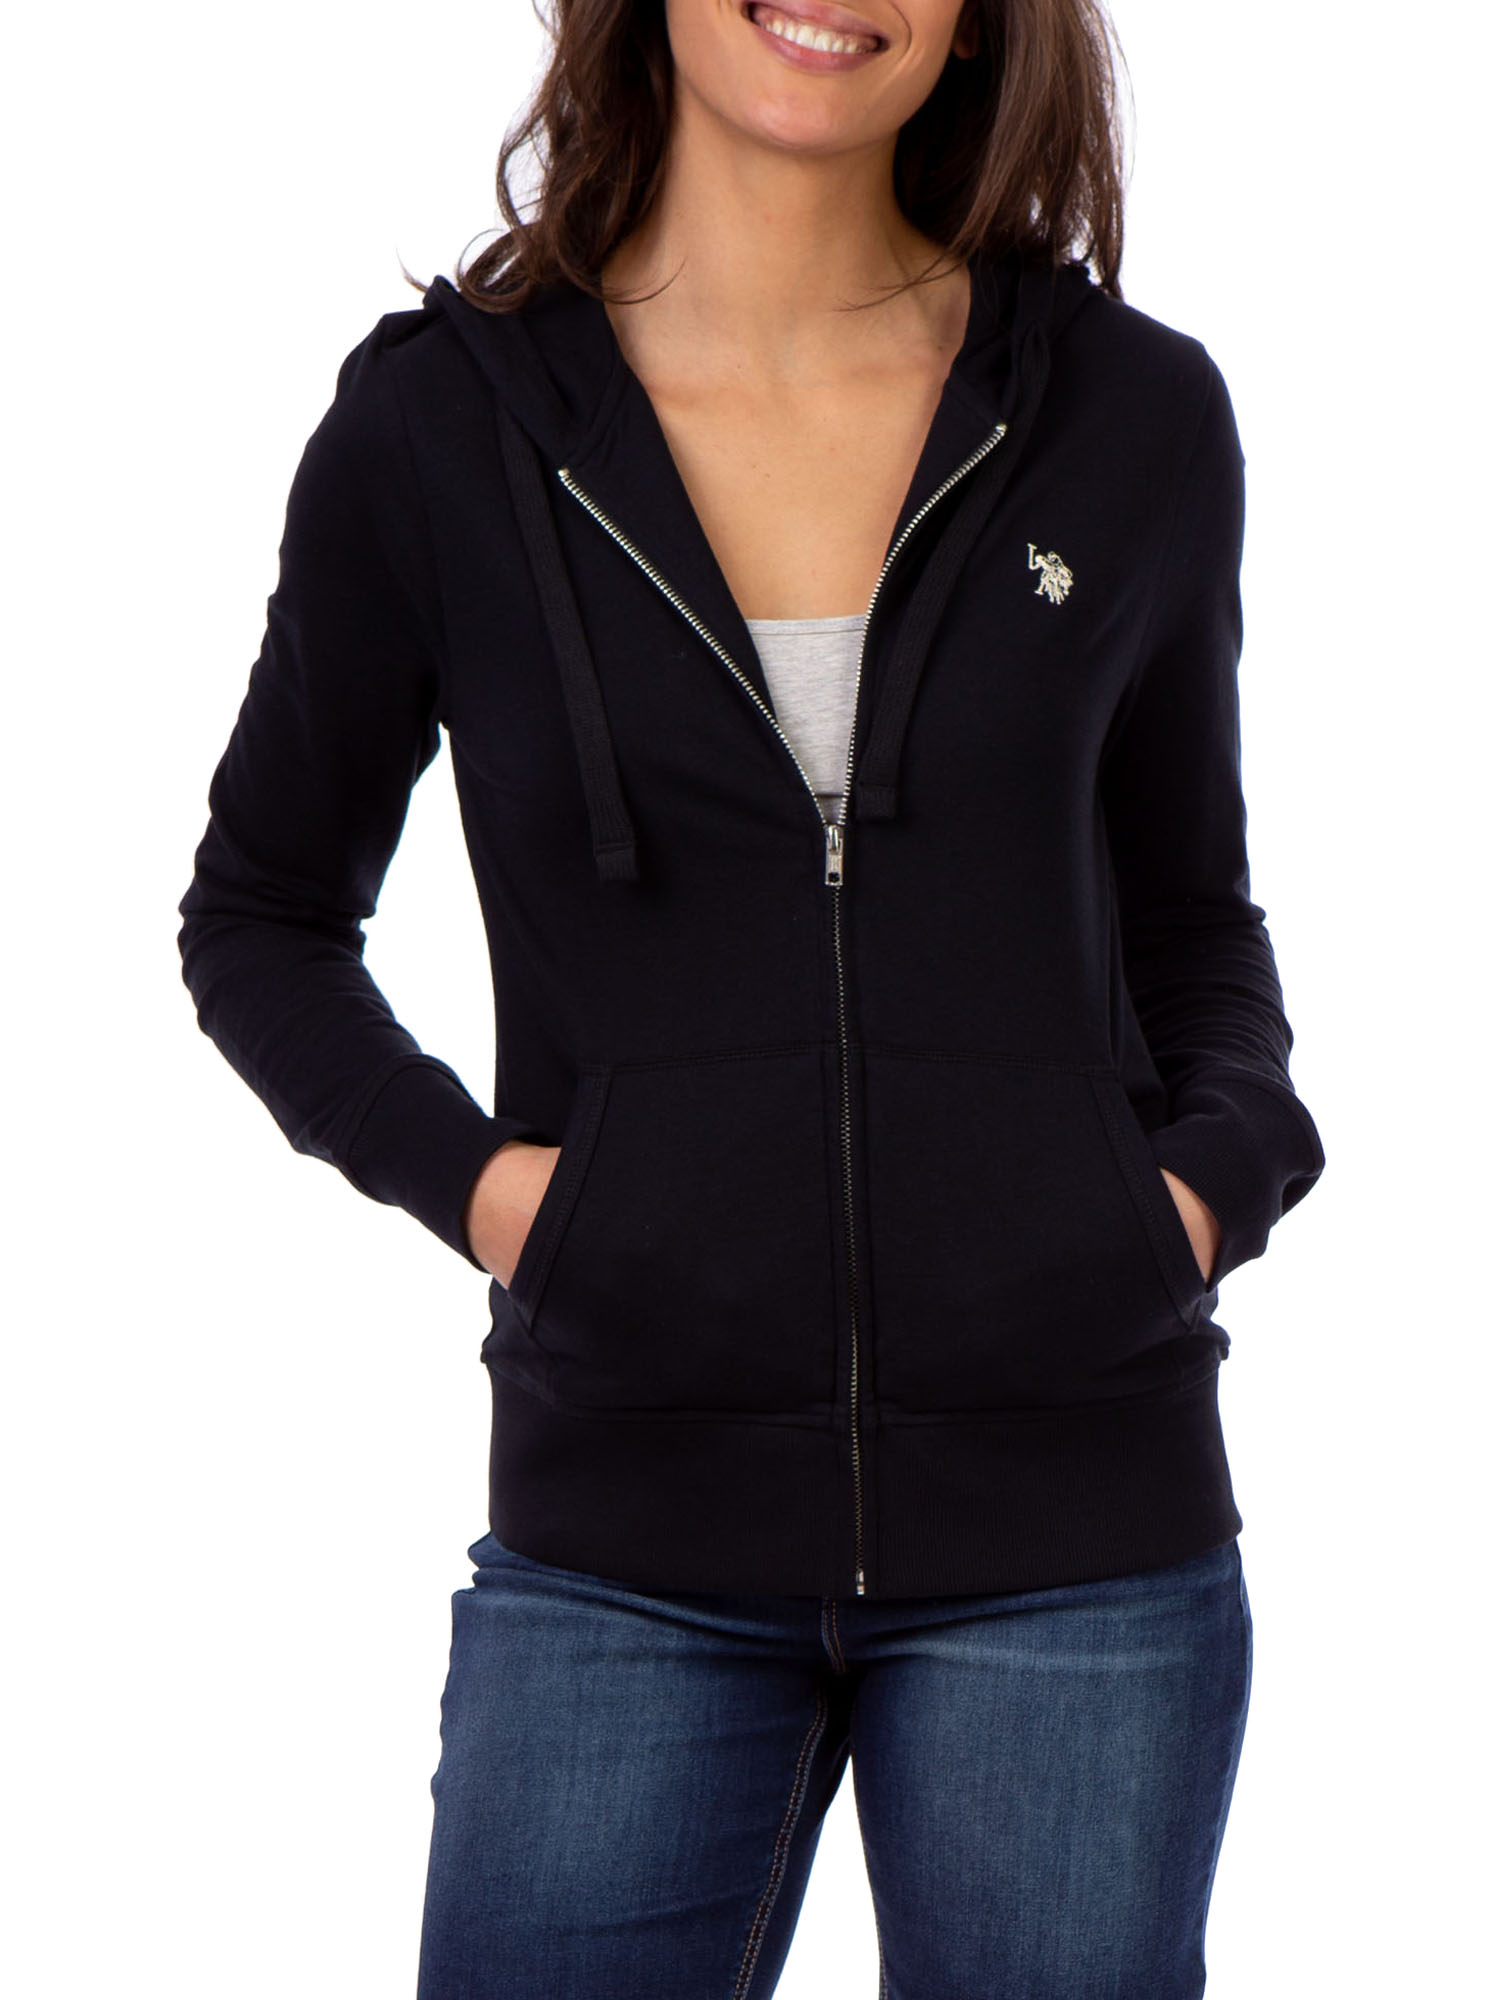 US Polo Assn. Long Sleeve Hooded Relaxed Fit Hoodie (Women's) 1 Pack - image 1 of 2